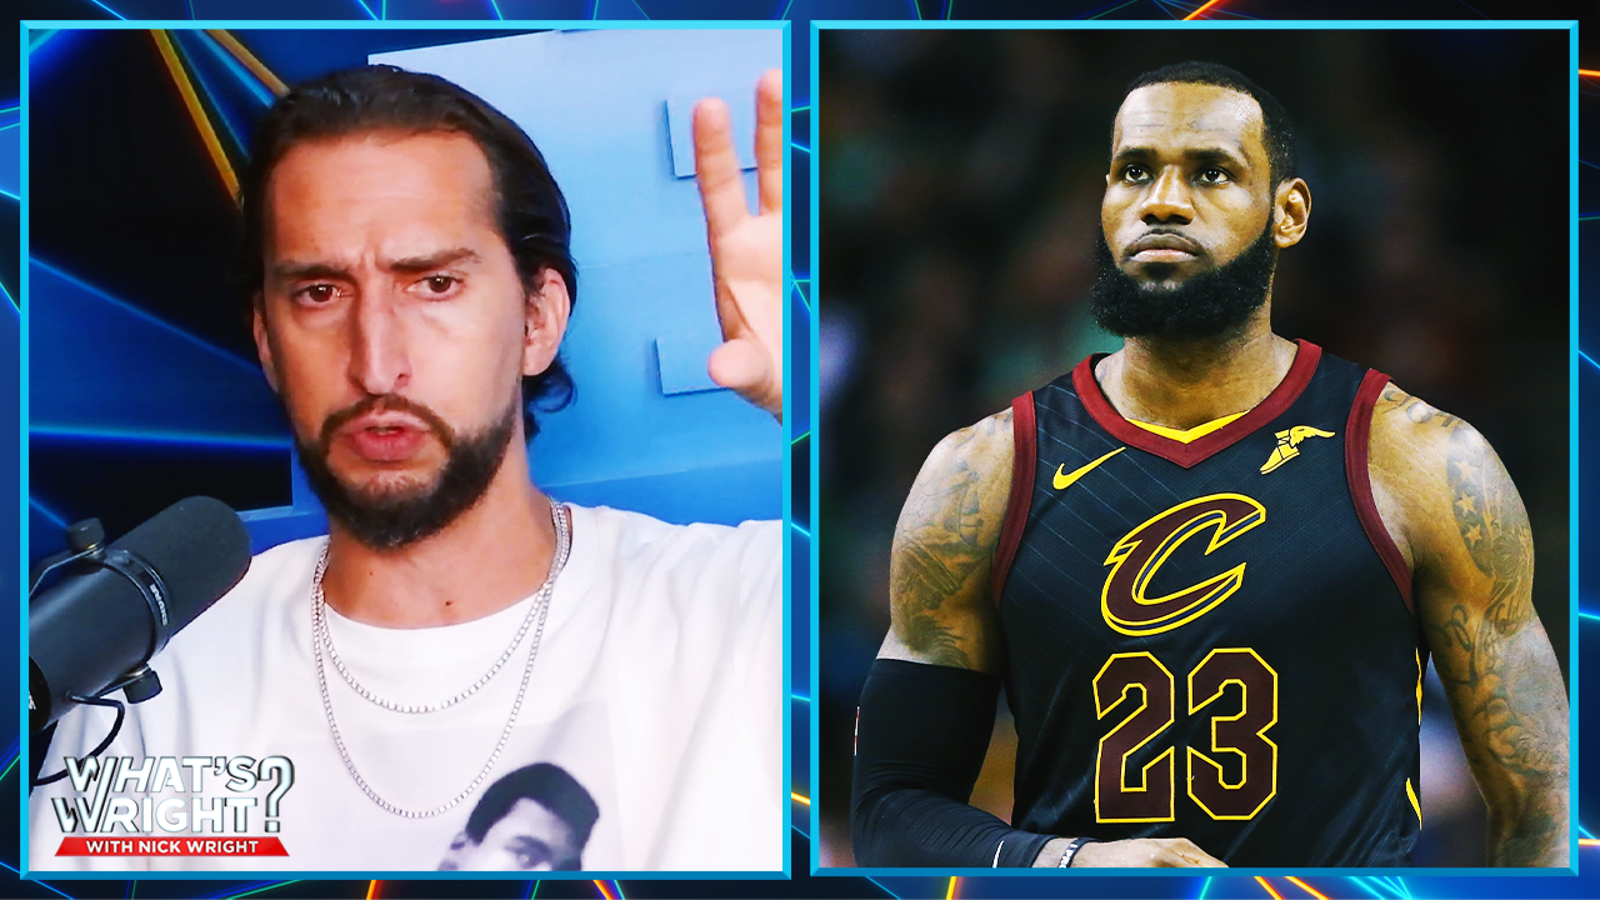 Nick defends ranking LeBron James as the best player of the last 50 years